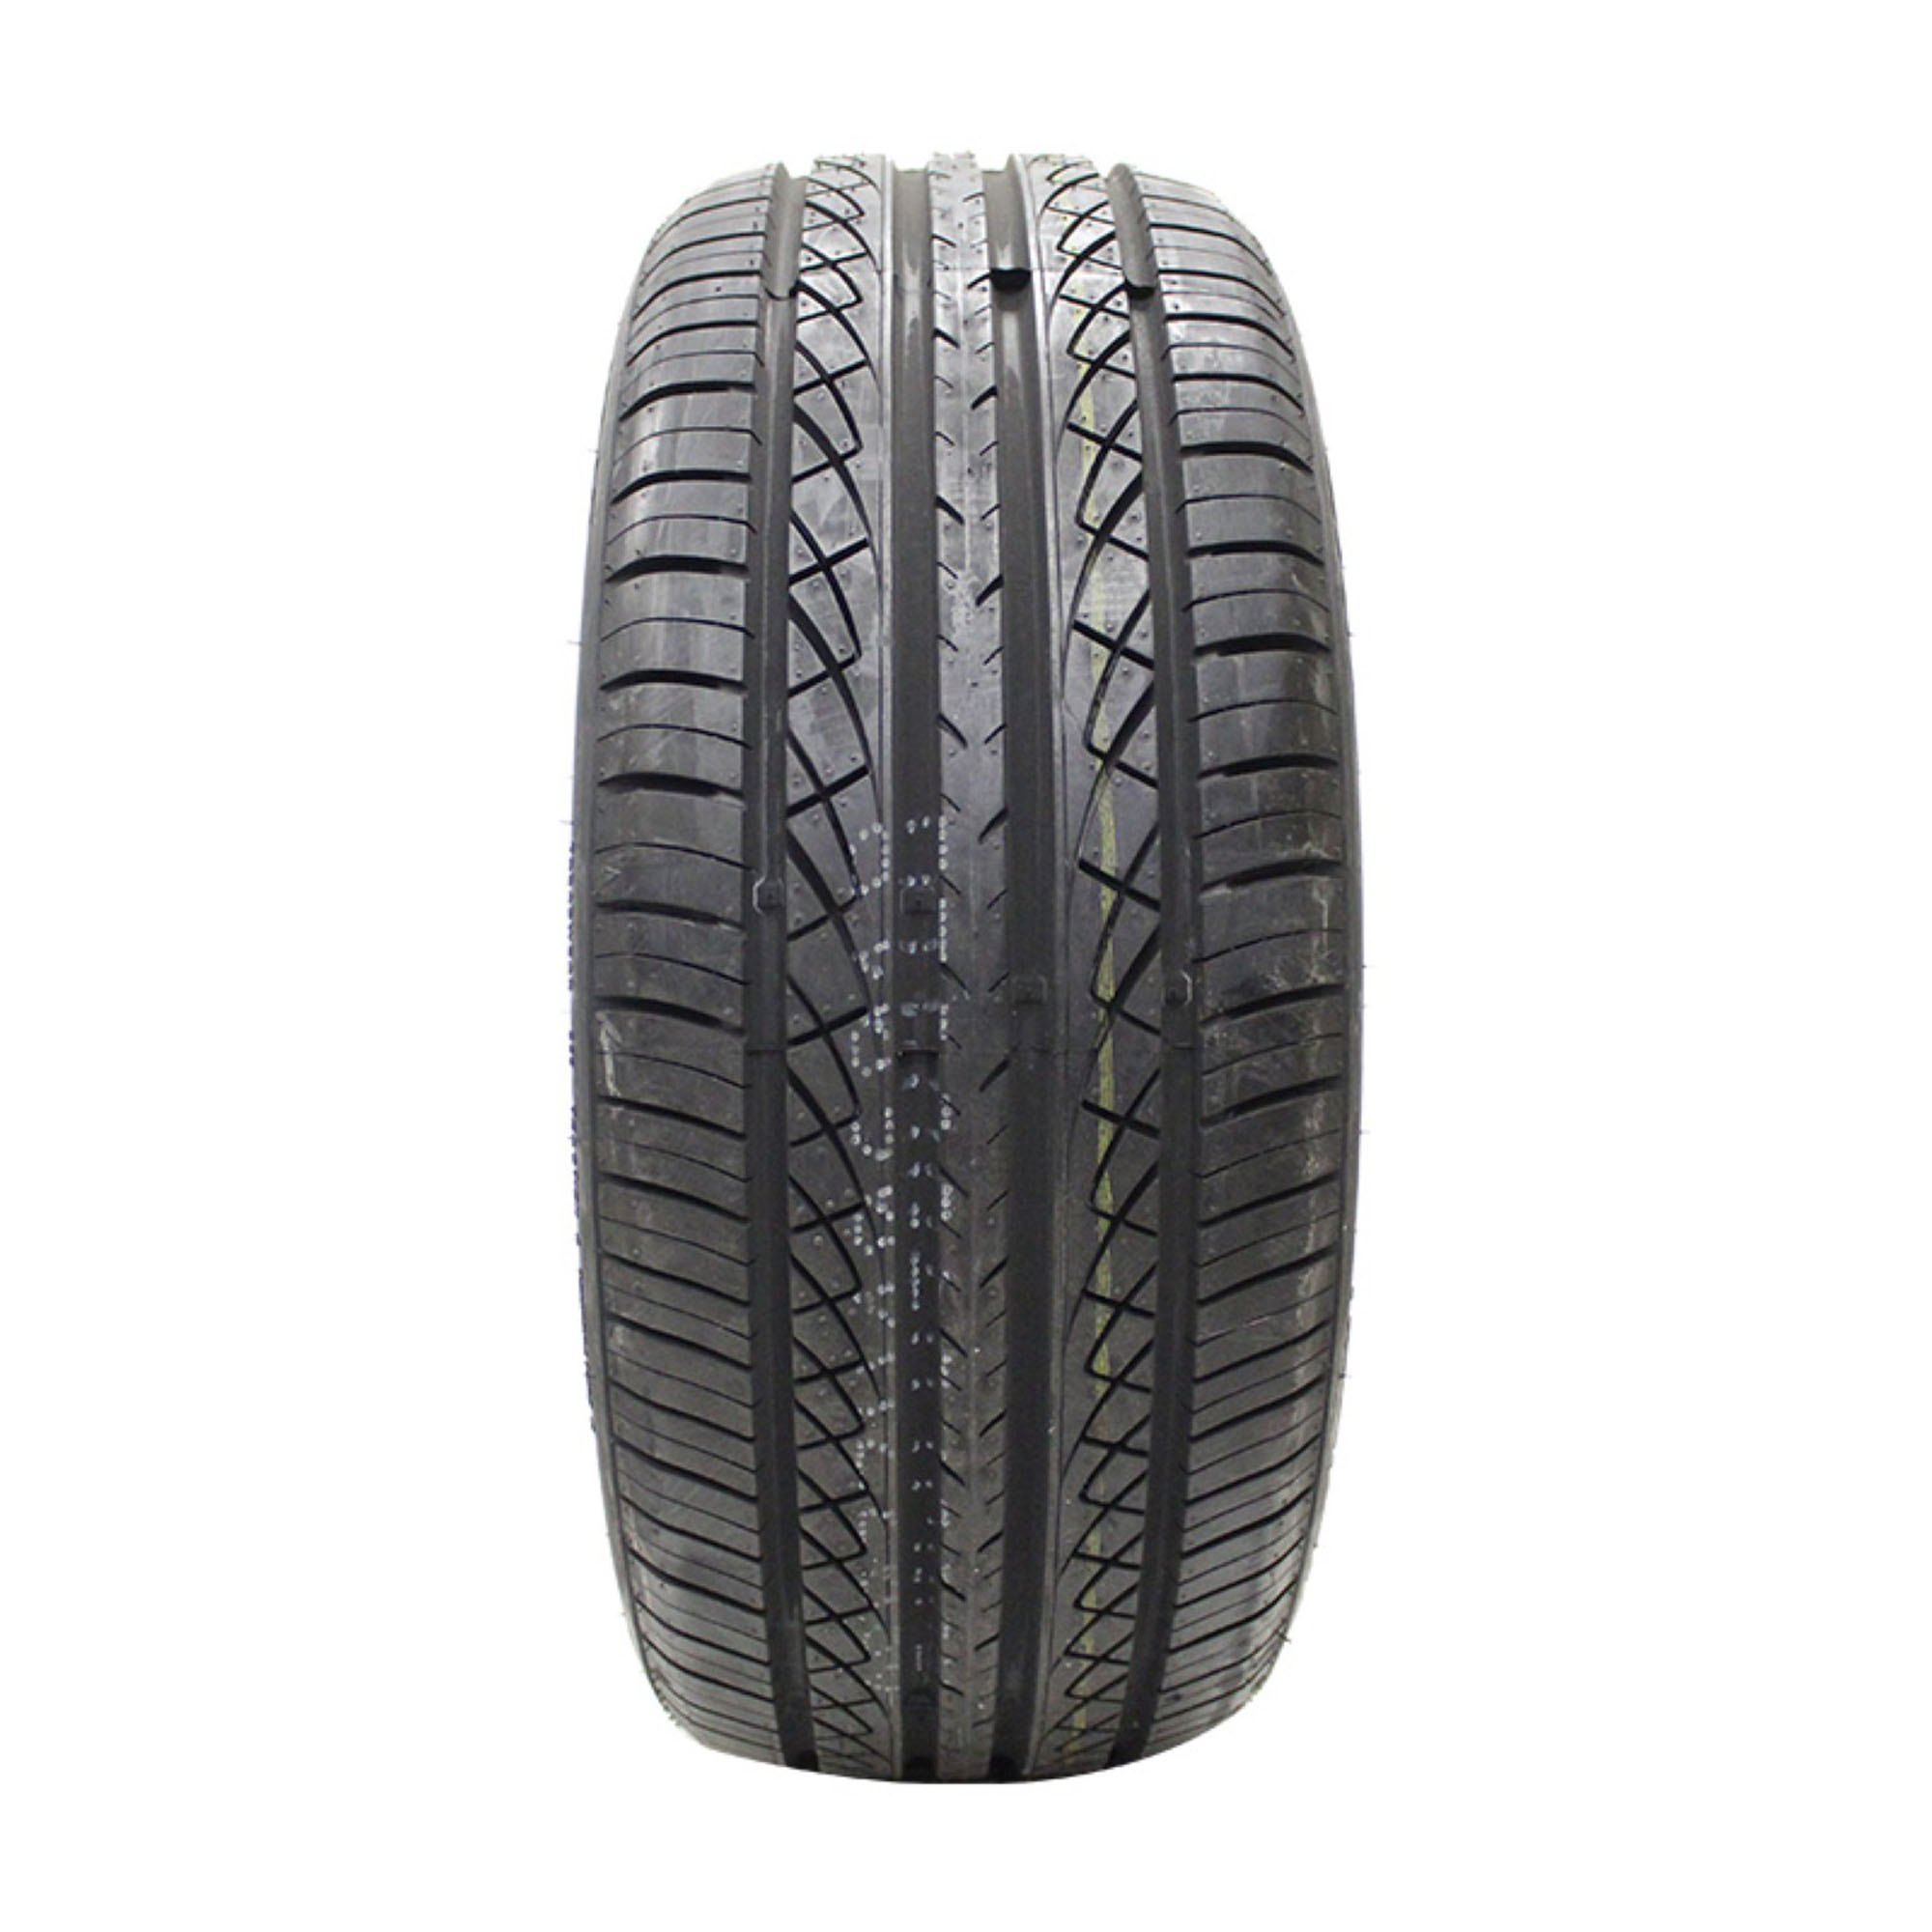 GT Radial Champiro UHP A/S UHP All Season 225/50ZR18 95W Passenger Tire - image 3 of 6